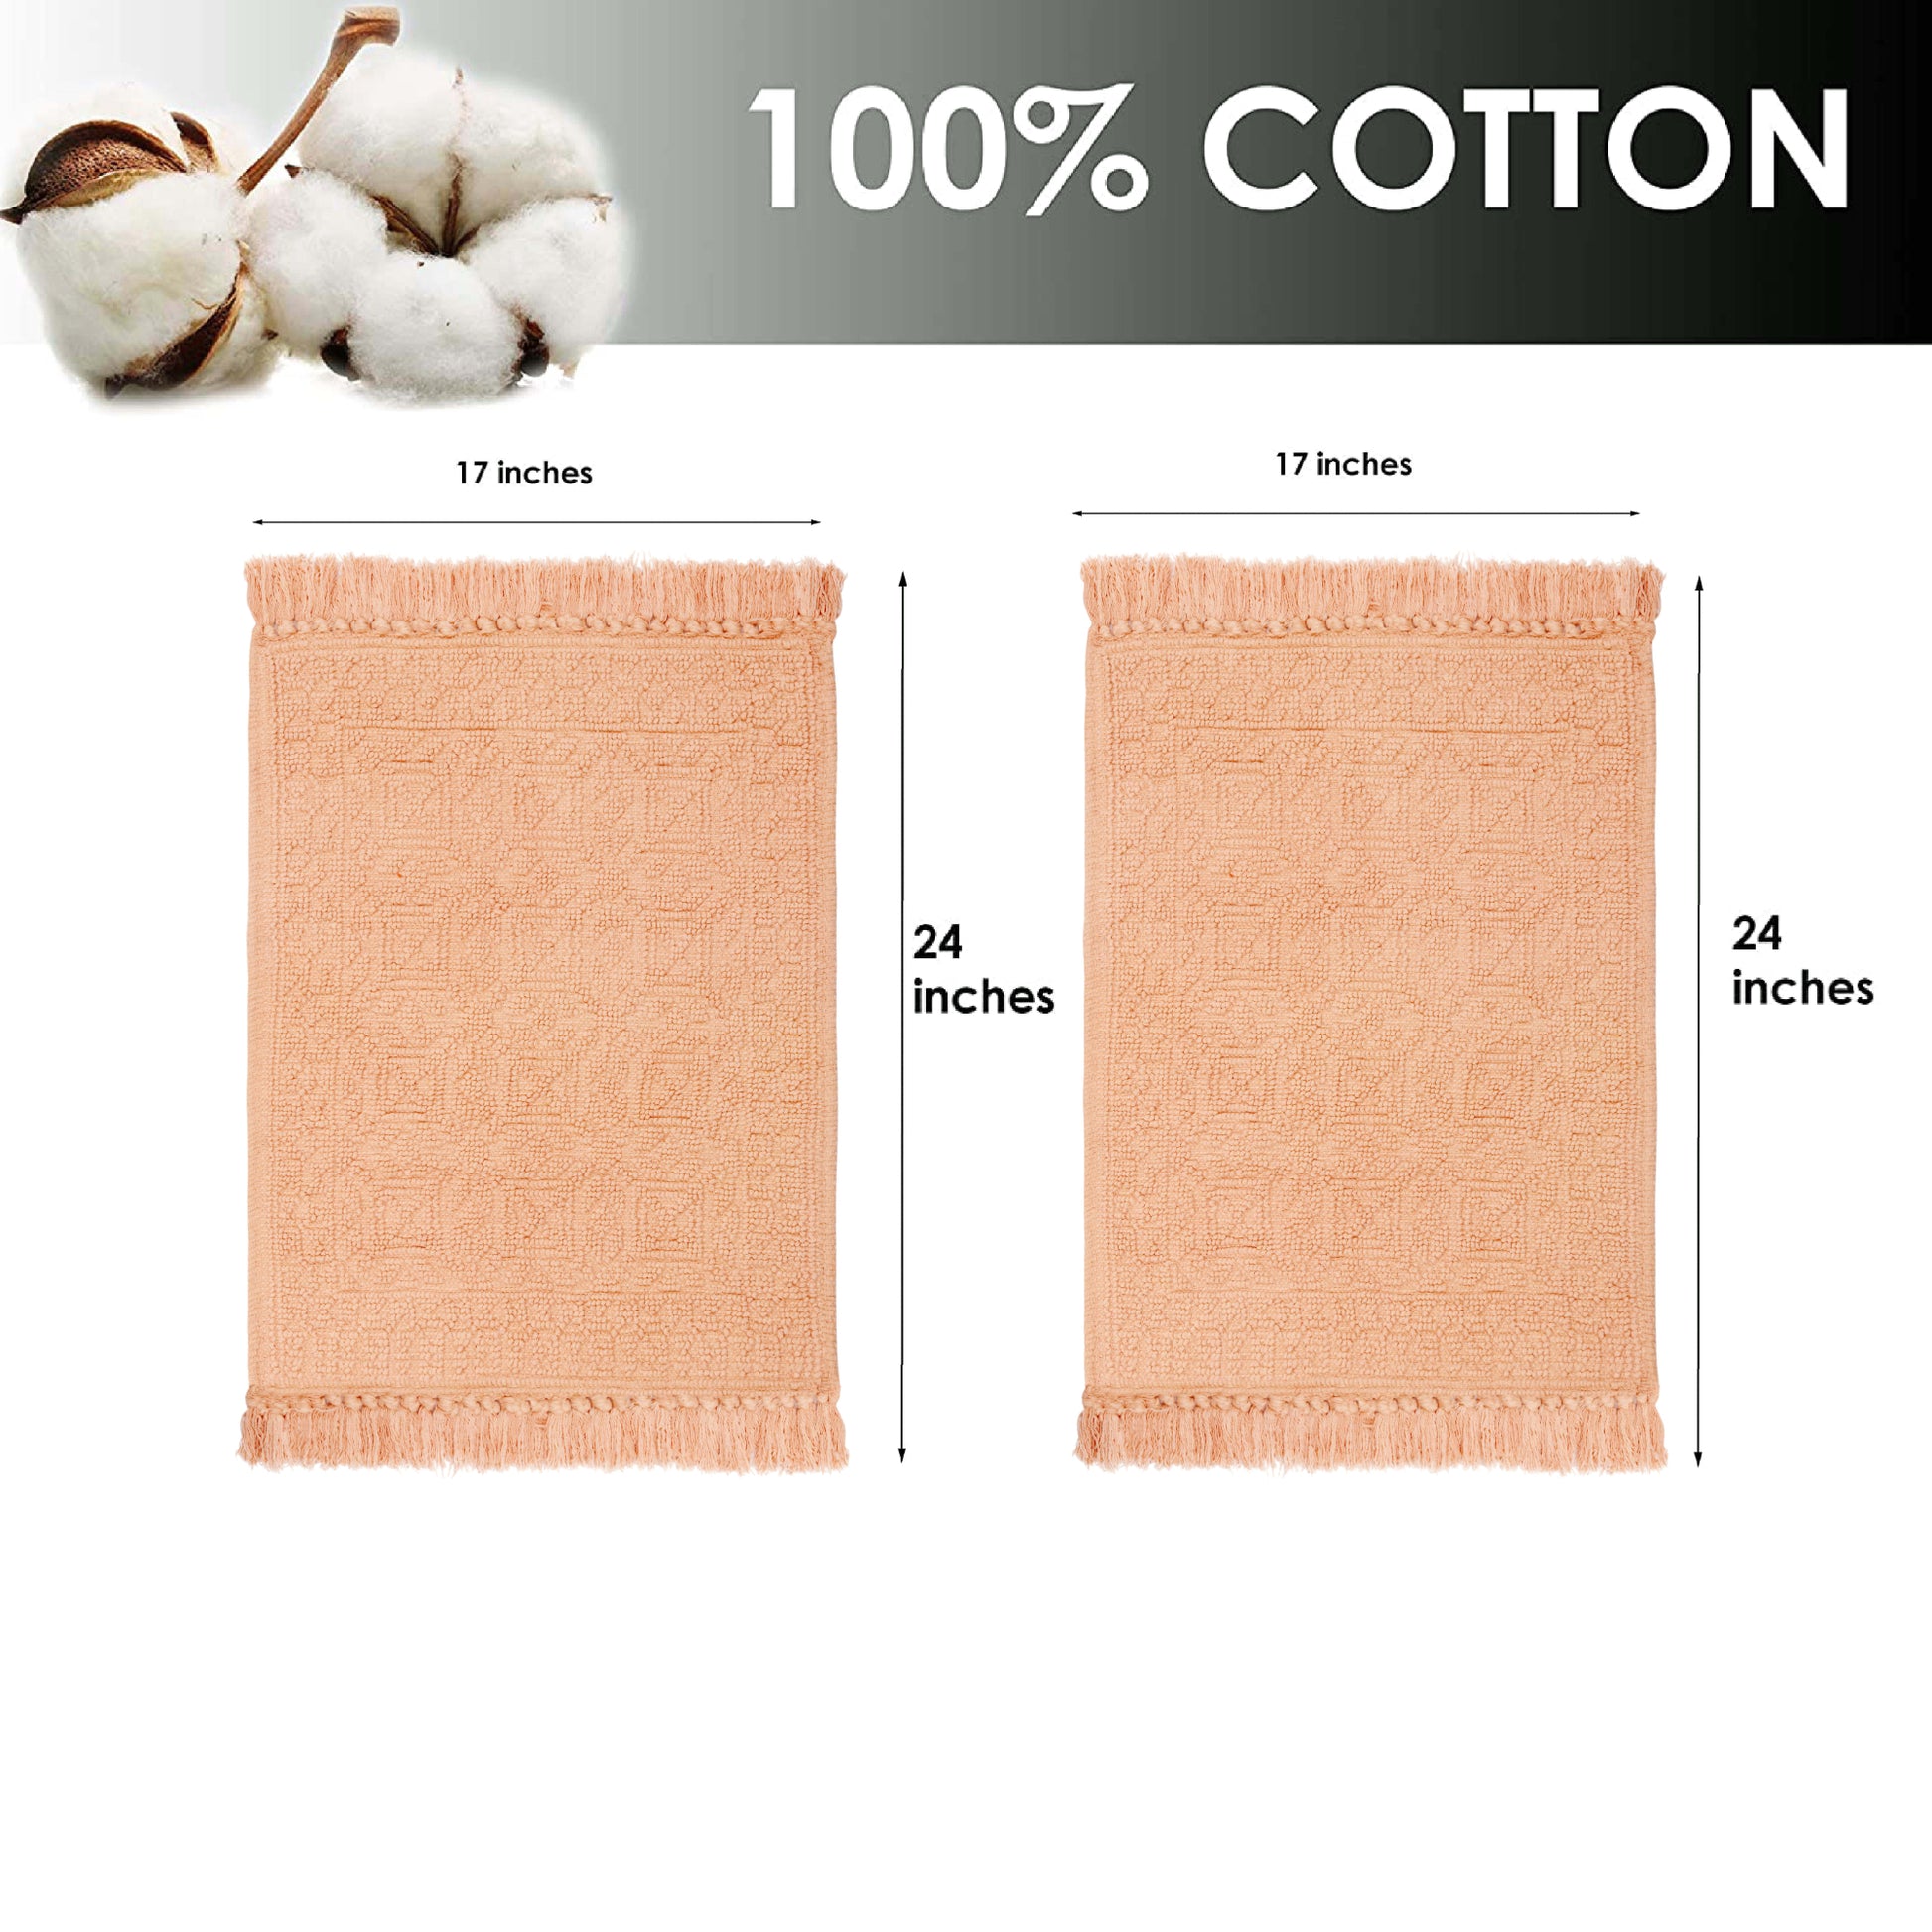 100% cotton hand woven water absorbent bathroom rugs (set of 2) - TreeWool Bathrugs#color_peach